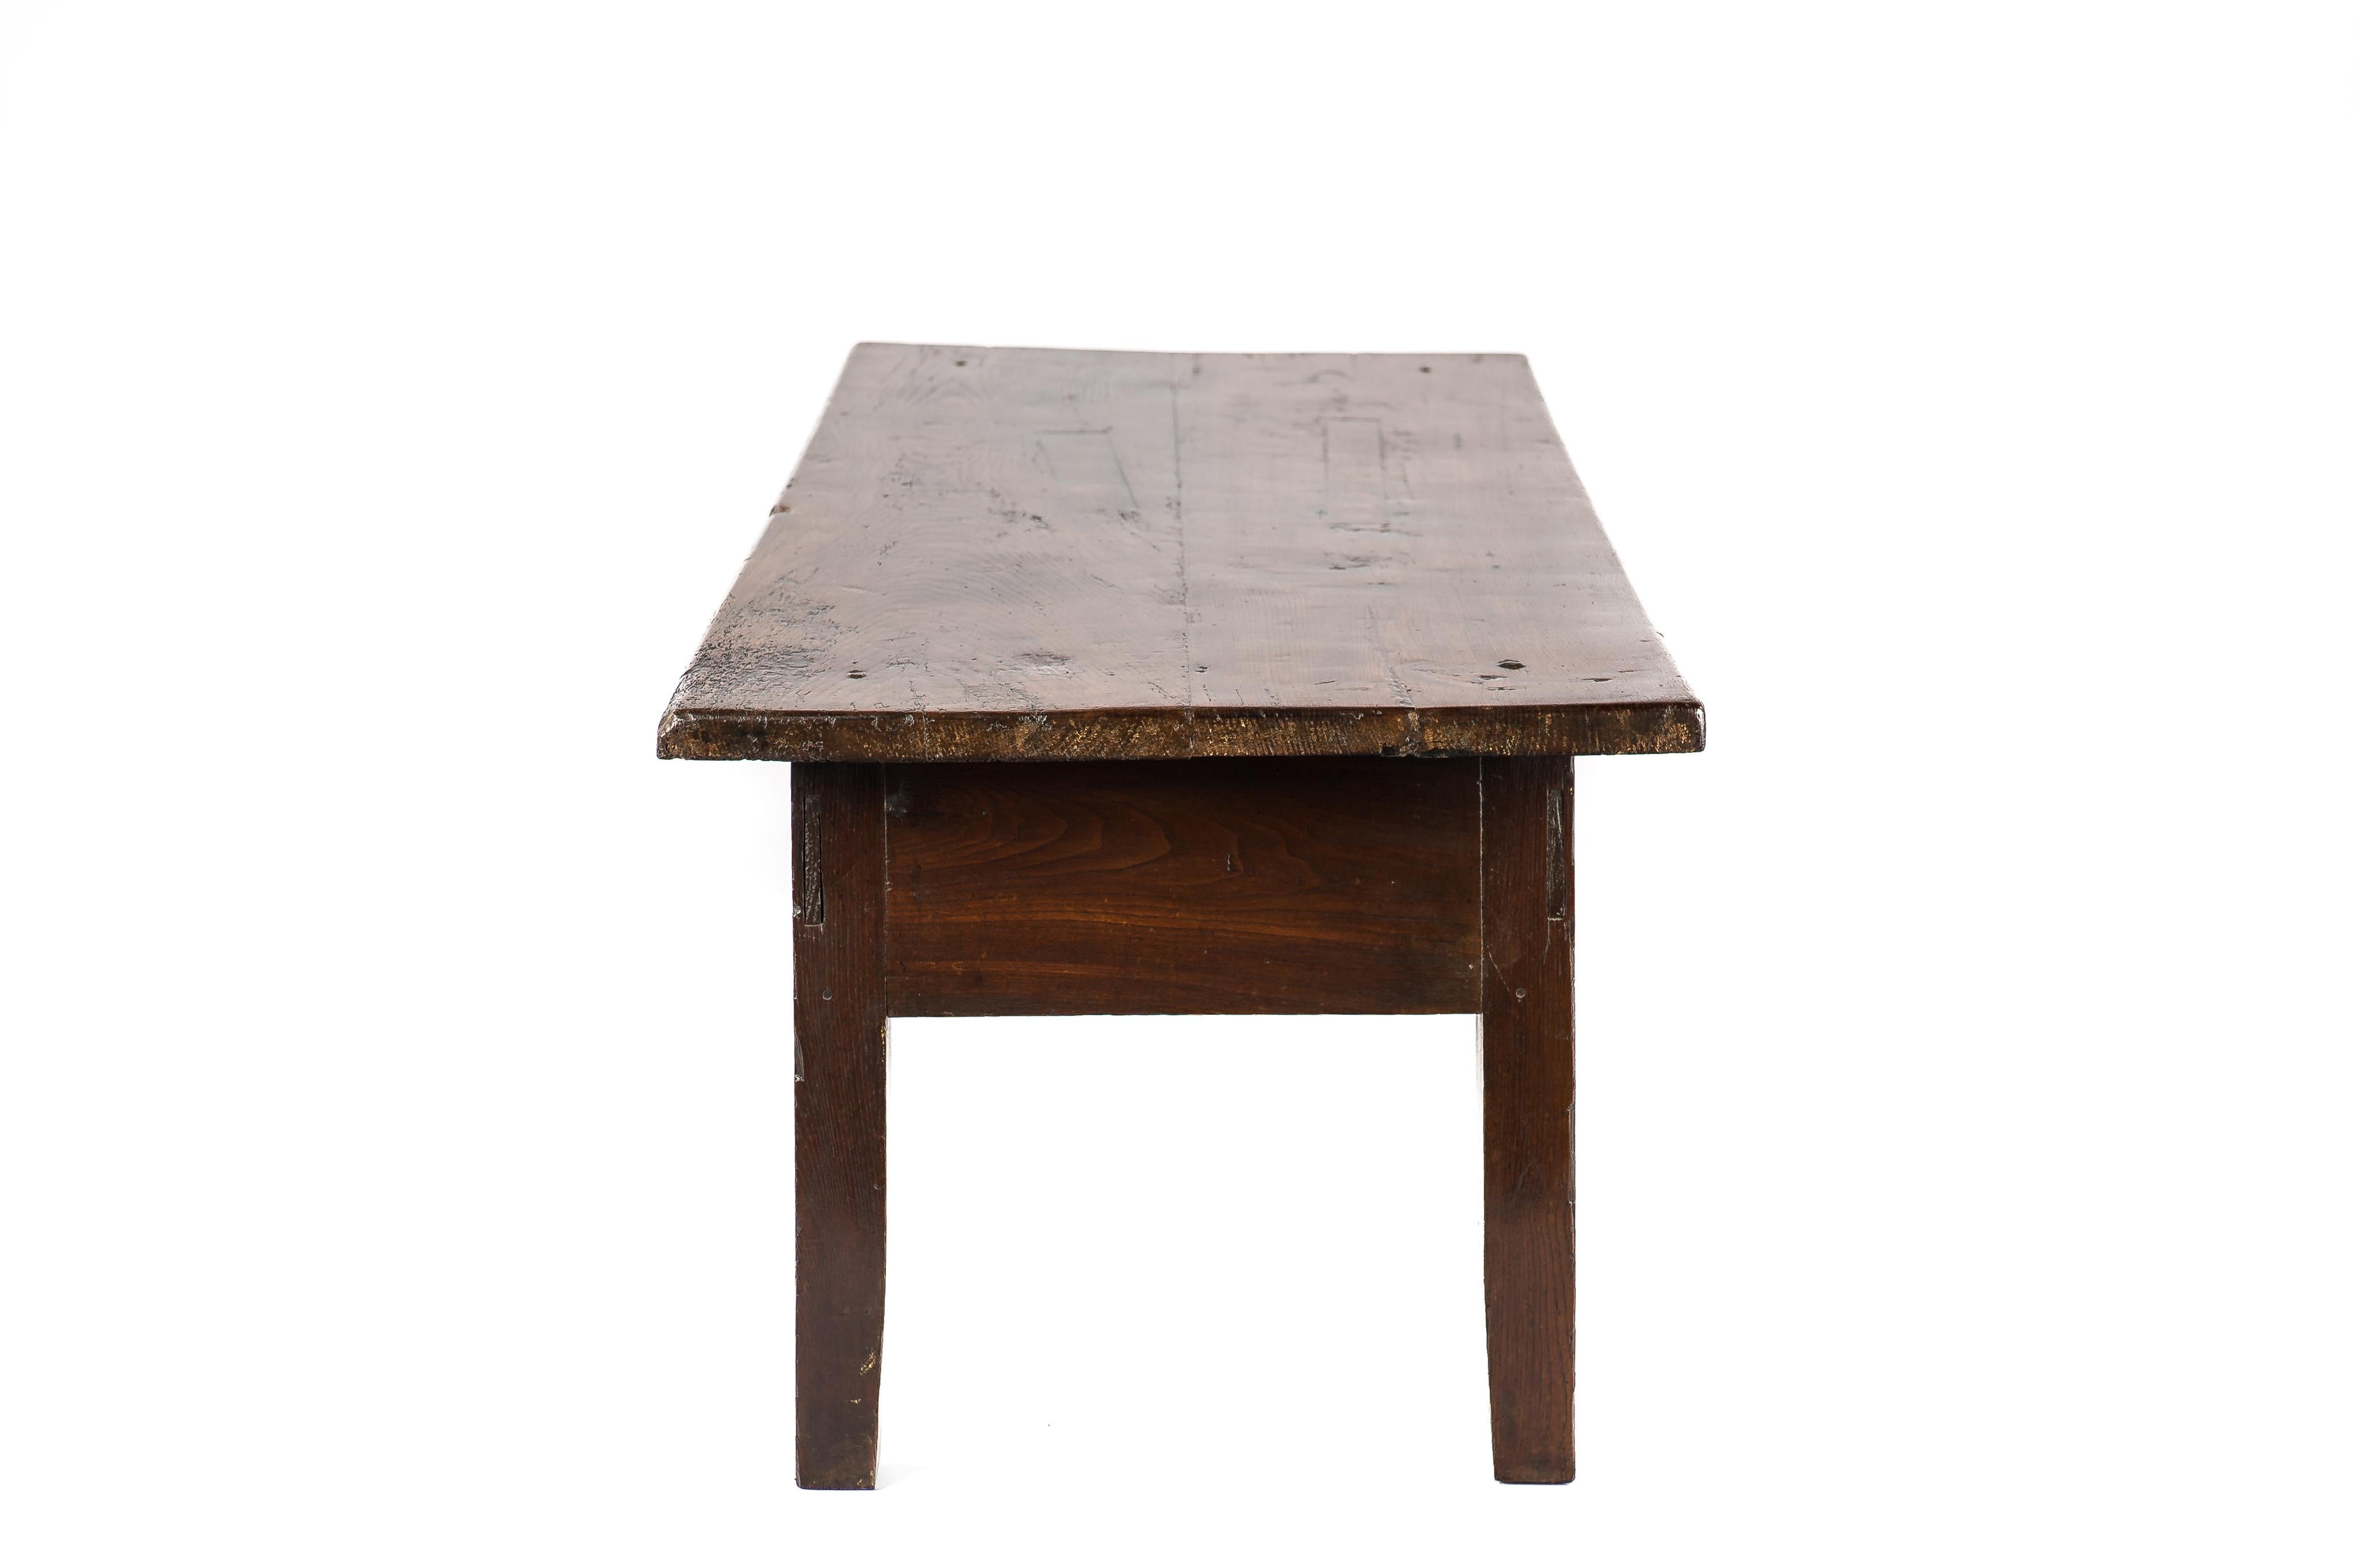 Polished Antique Early 19th-Century Rustic Spanish Warm Brown Chestnut Coffee Table For Sale